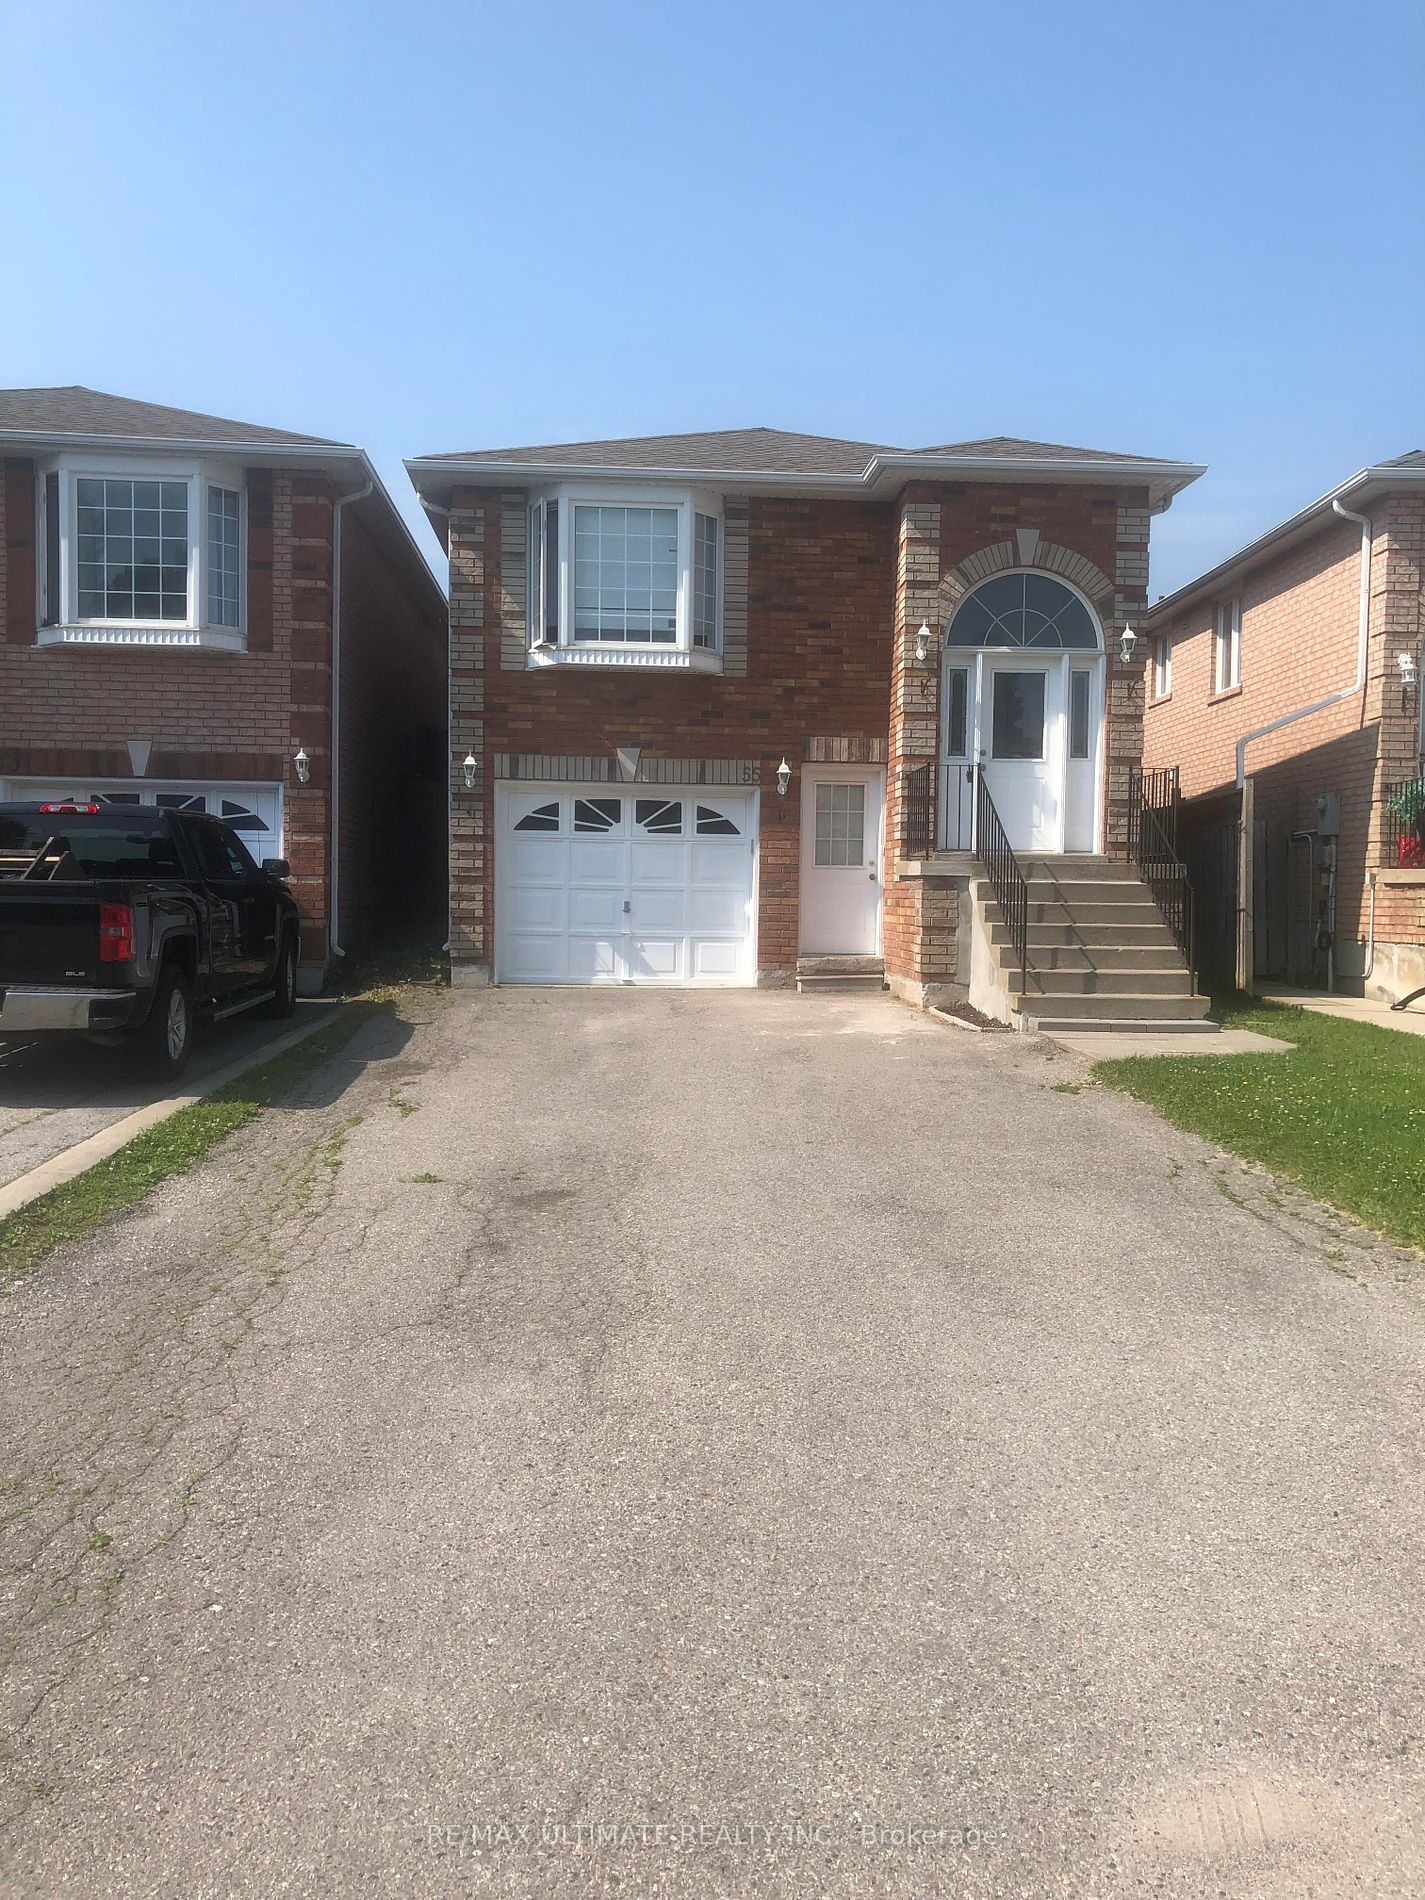 Link house for sale at 55 Roughley St Bradford West Gwillimbury Ontario